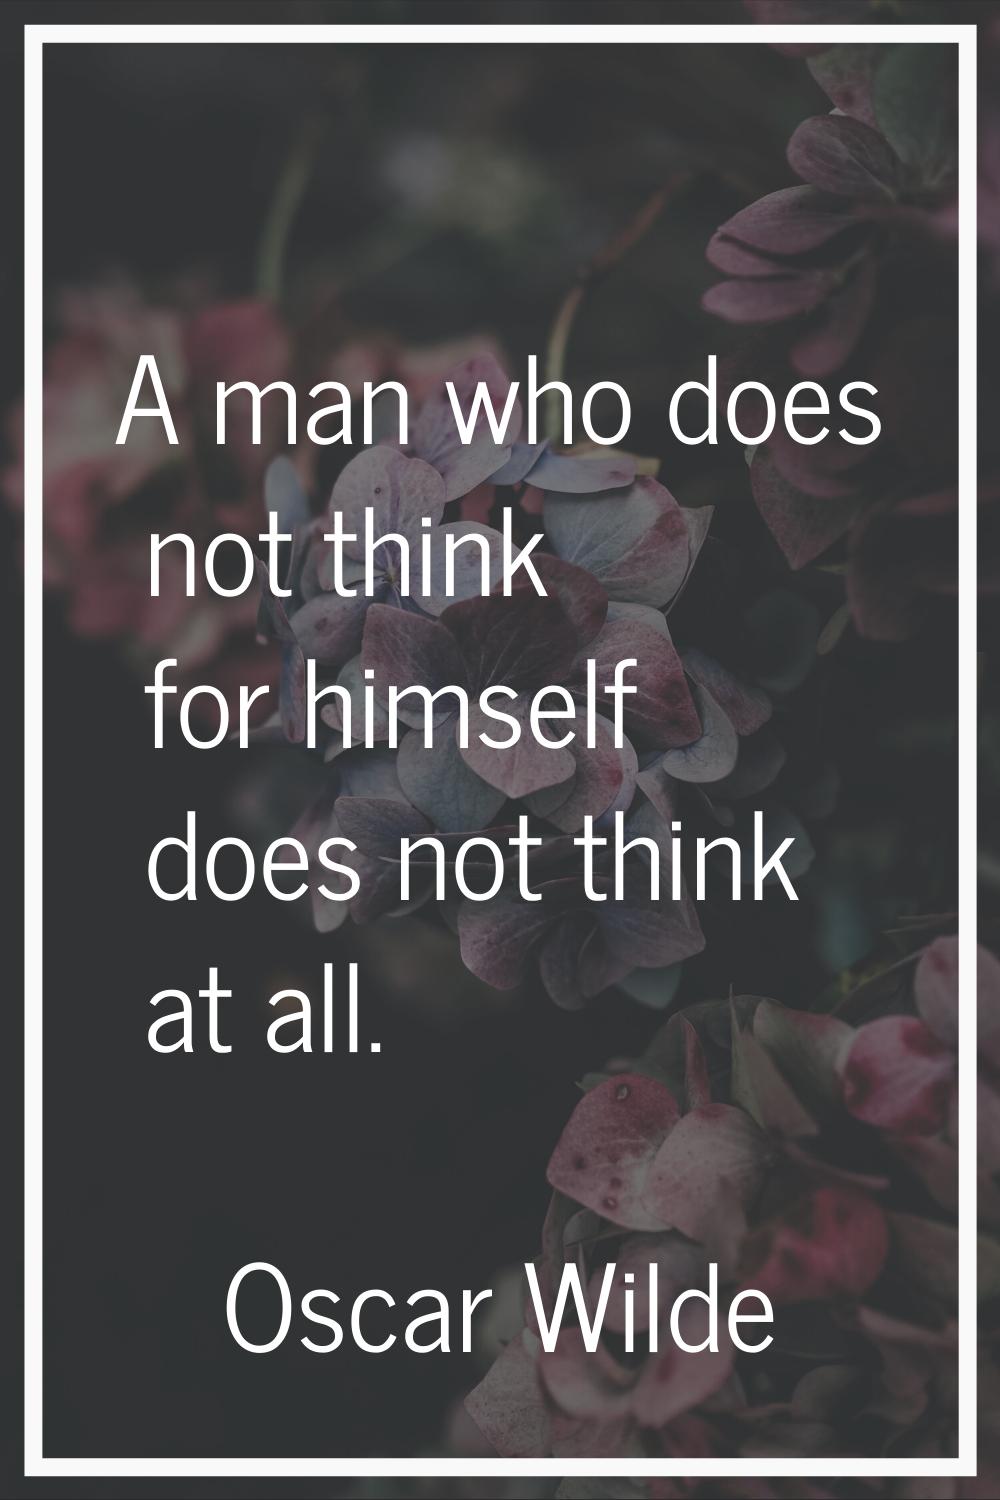 A man who does not think for himself does not think at all.